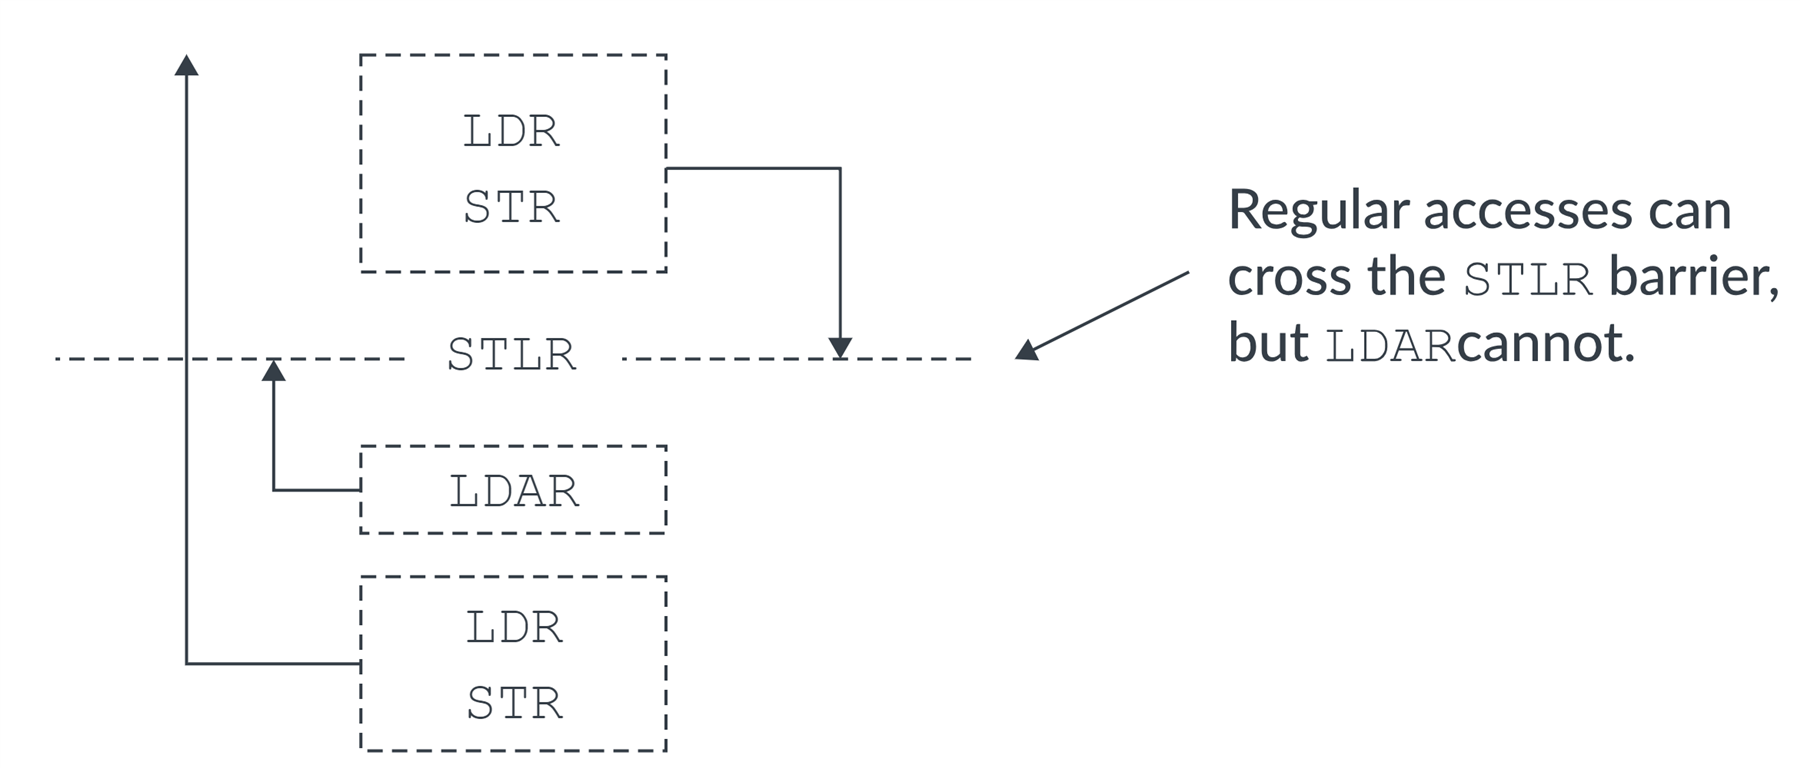 Ordering requirements on LDAR-based acquire-release sequences